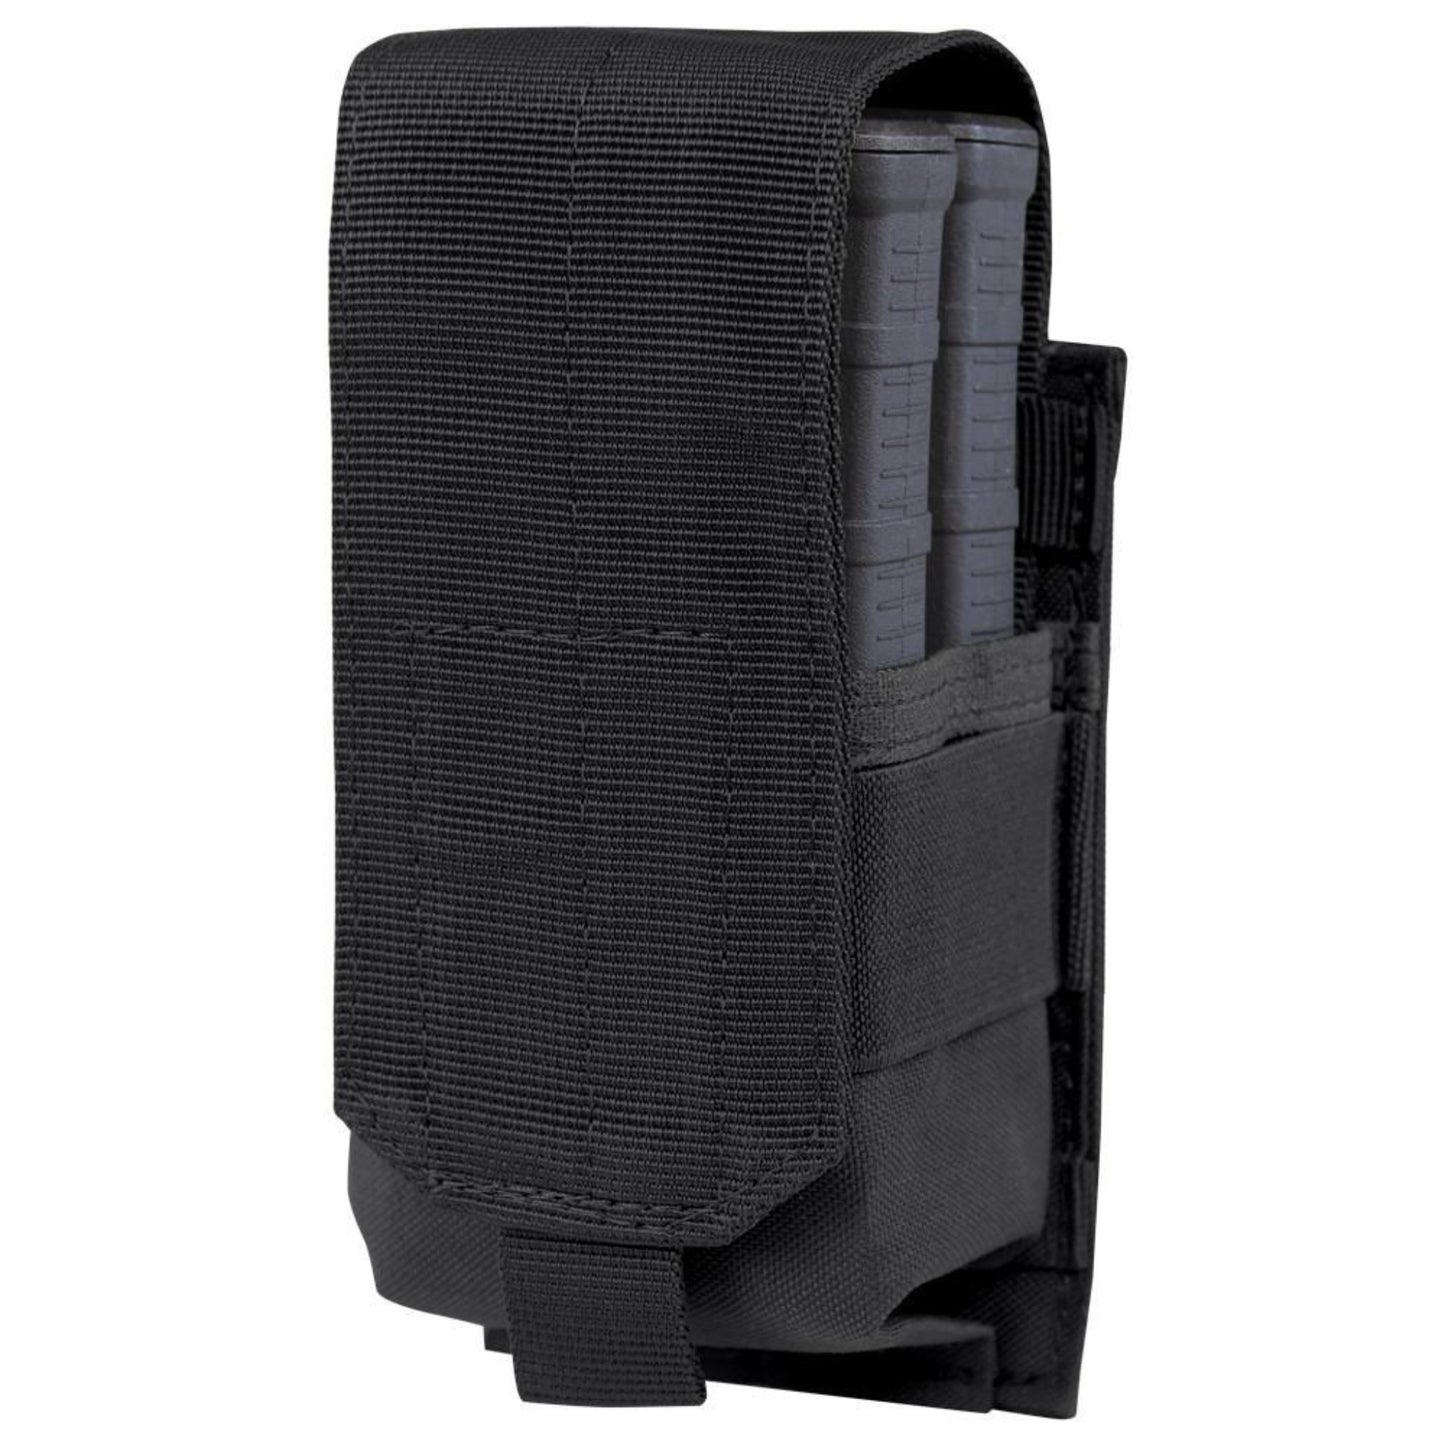 Image of the Single M14 Mag Pouch-Gen II in black.